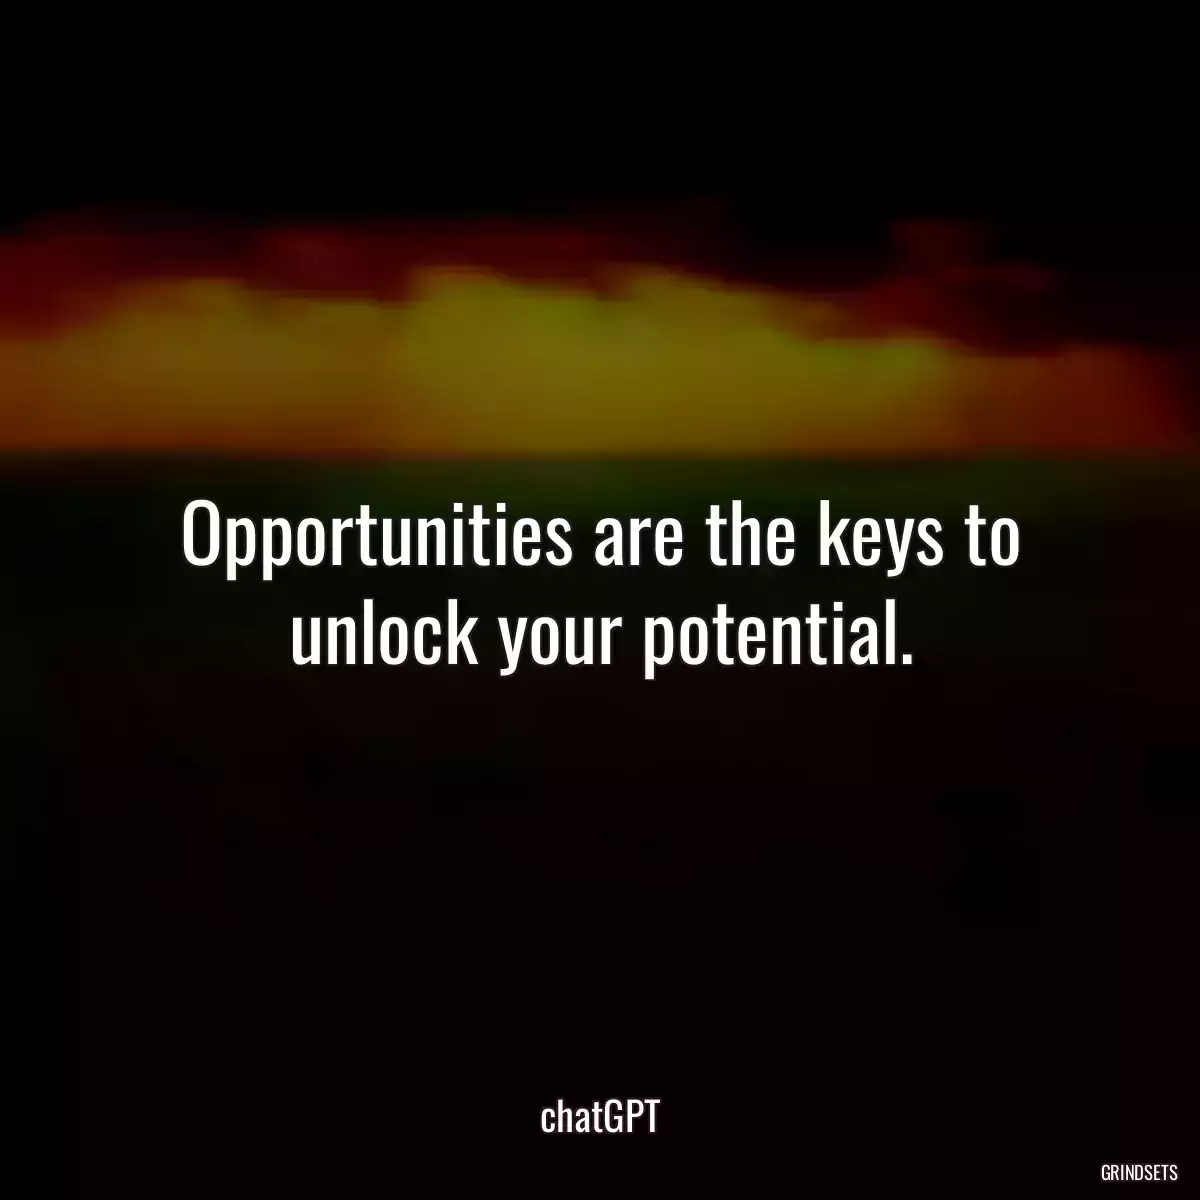 Opportunities are the keys to unlock your potential.